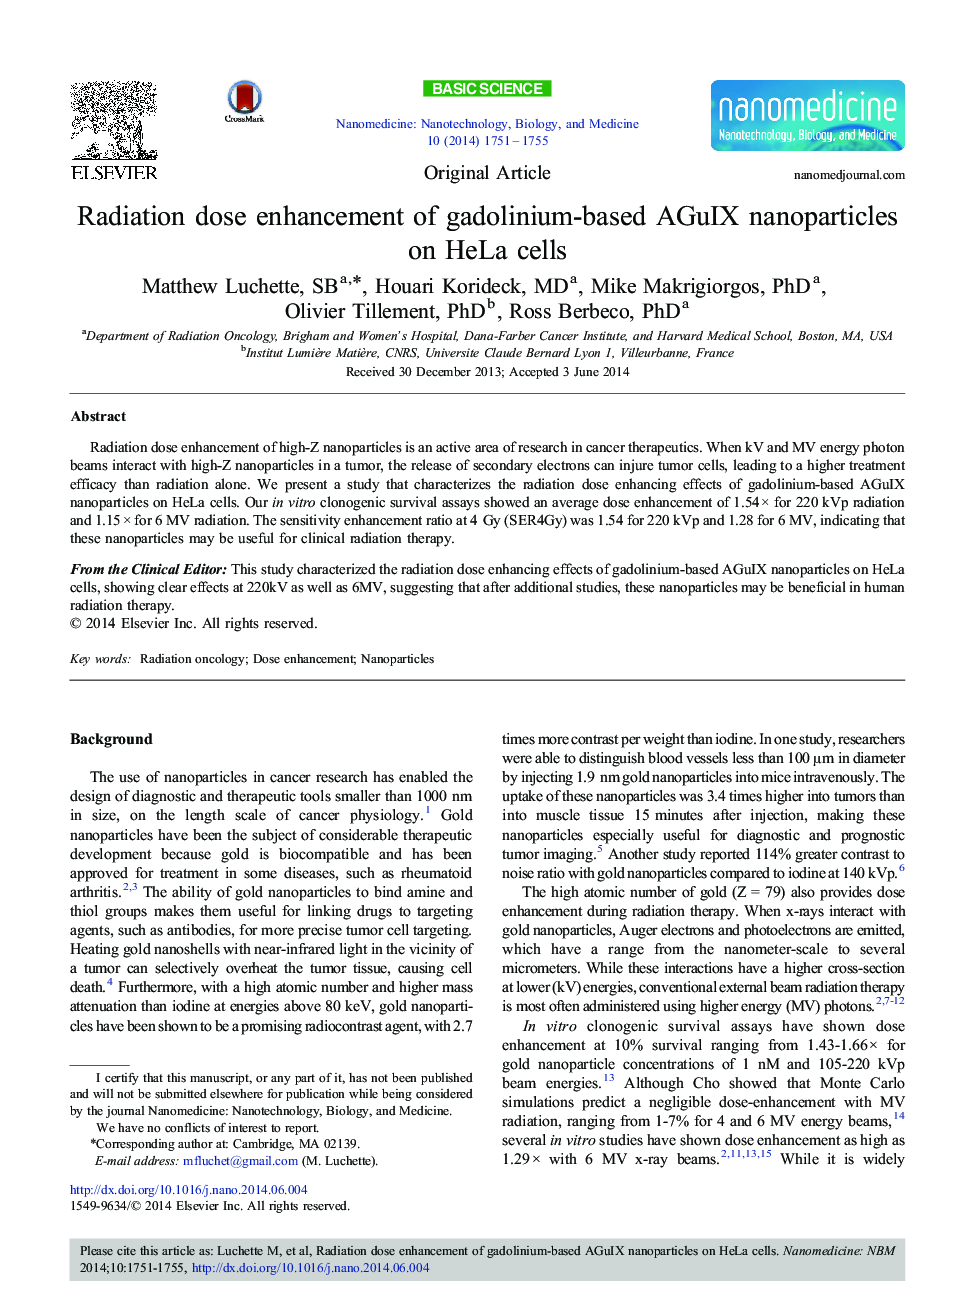 Radiation dose enhancement of gadolinium-based AGuIX nanoparticles on HeLa cells